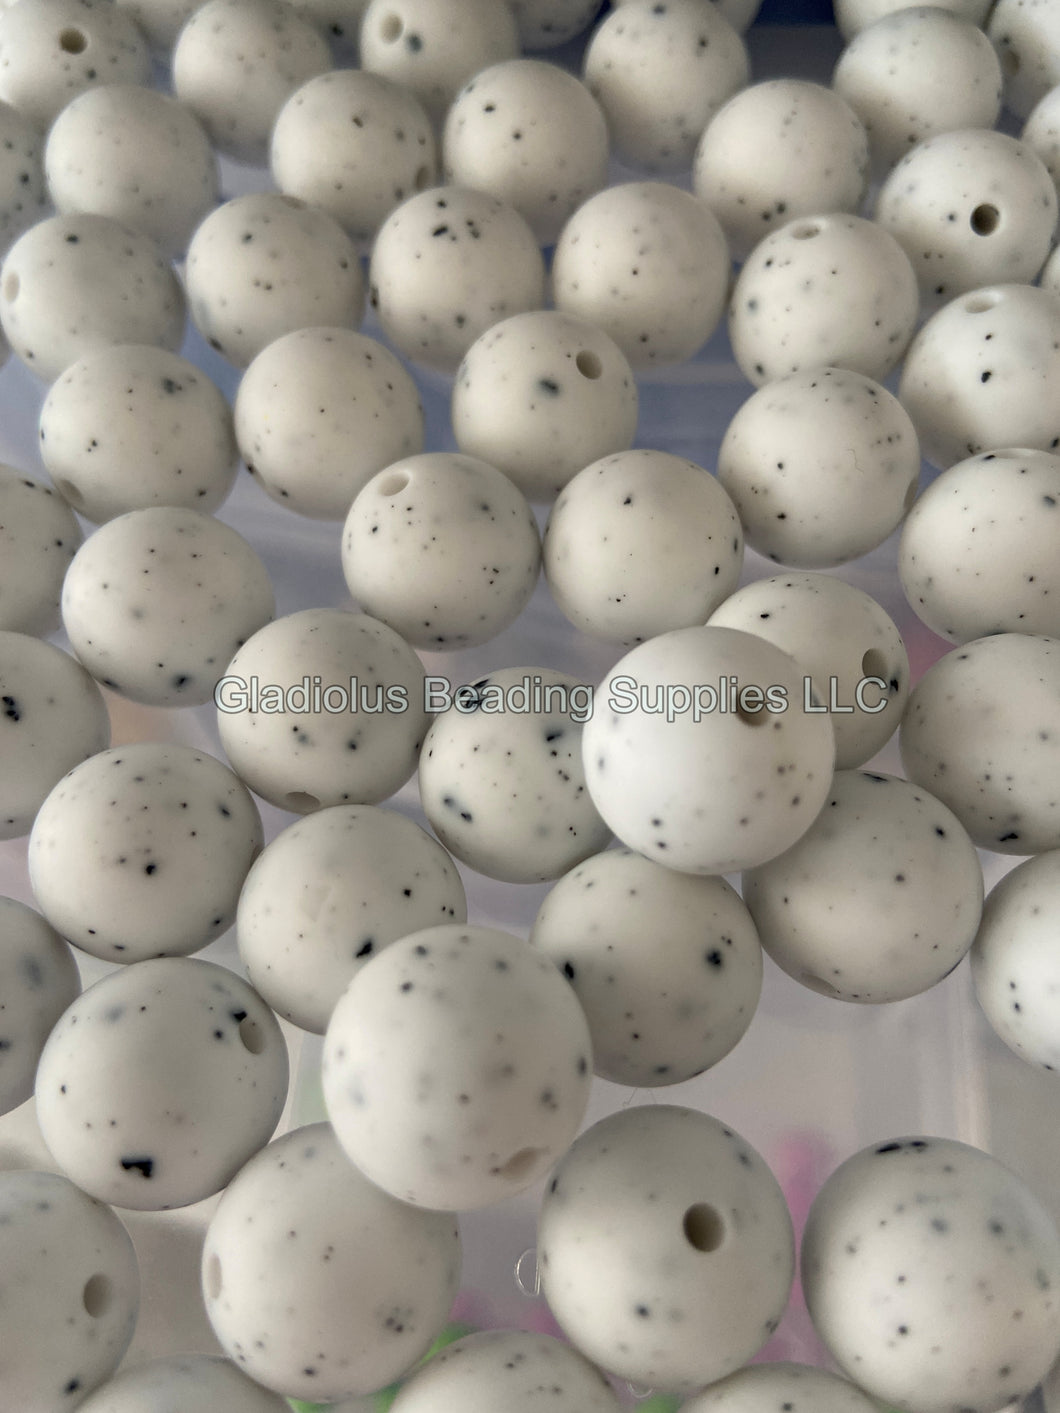 Granite Solid Color Beads, 12mm/15mm Round Silicone Bead, Teething Beads, BPA Free, Loose Beads.